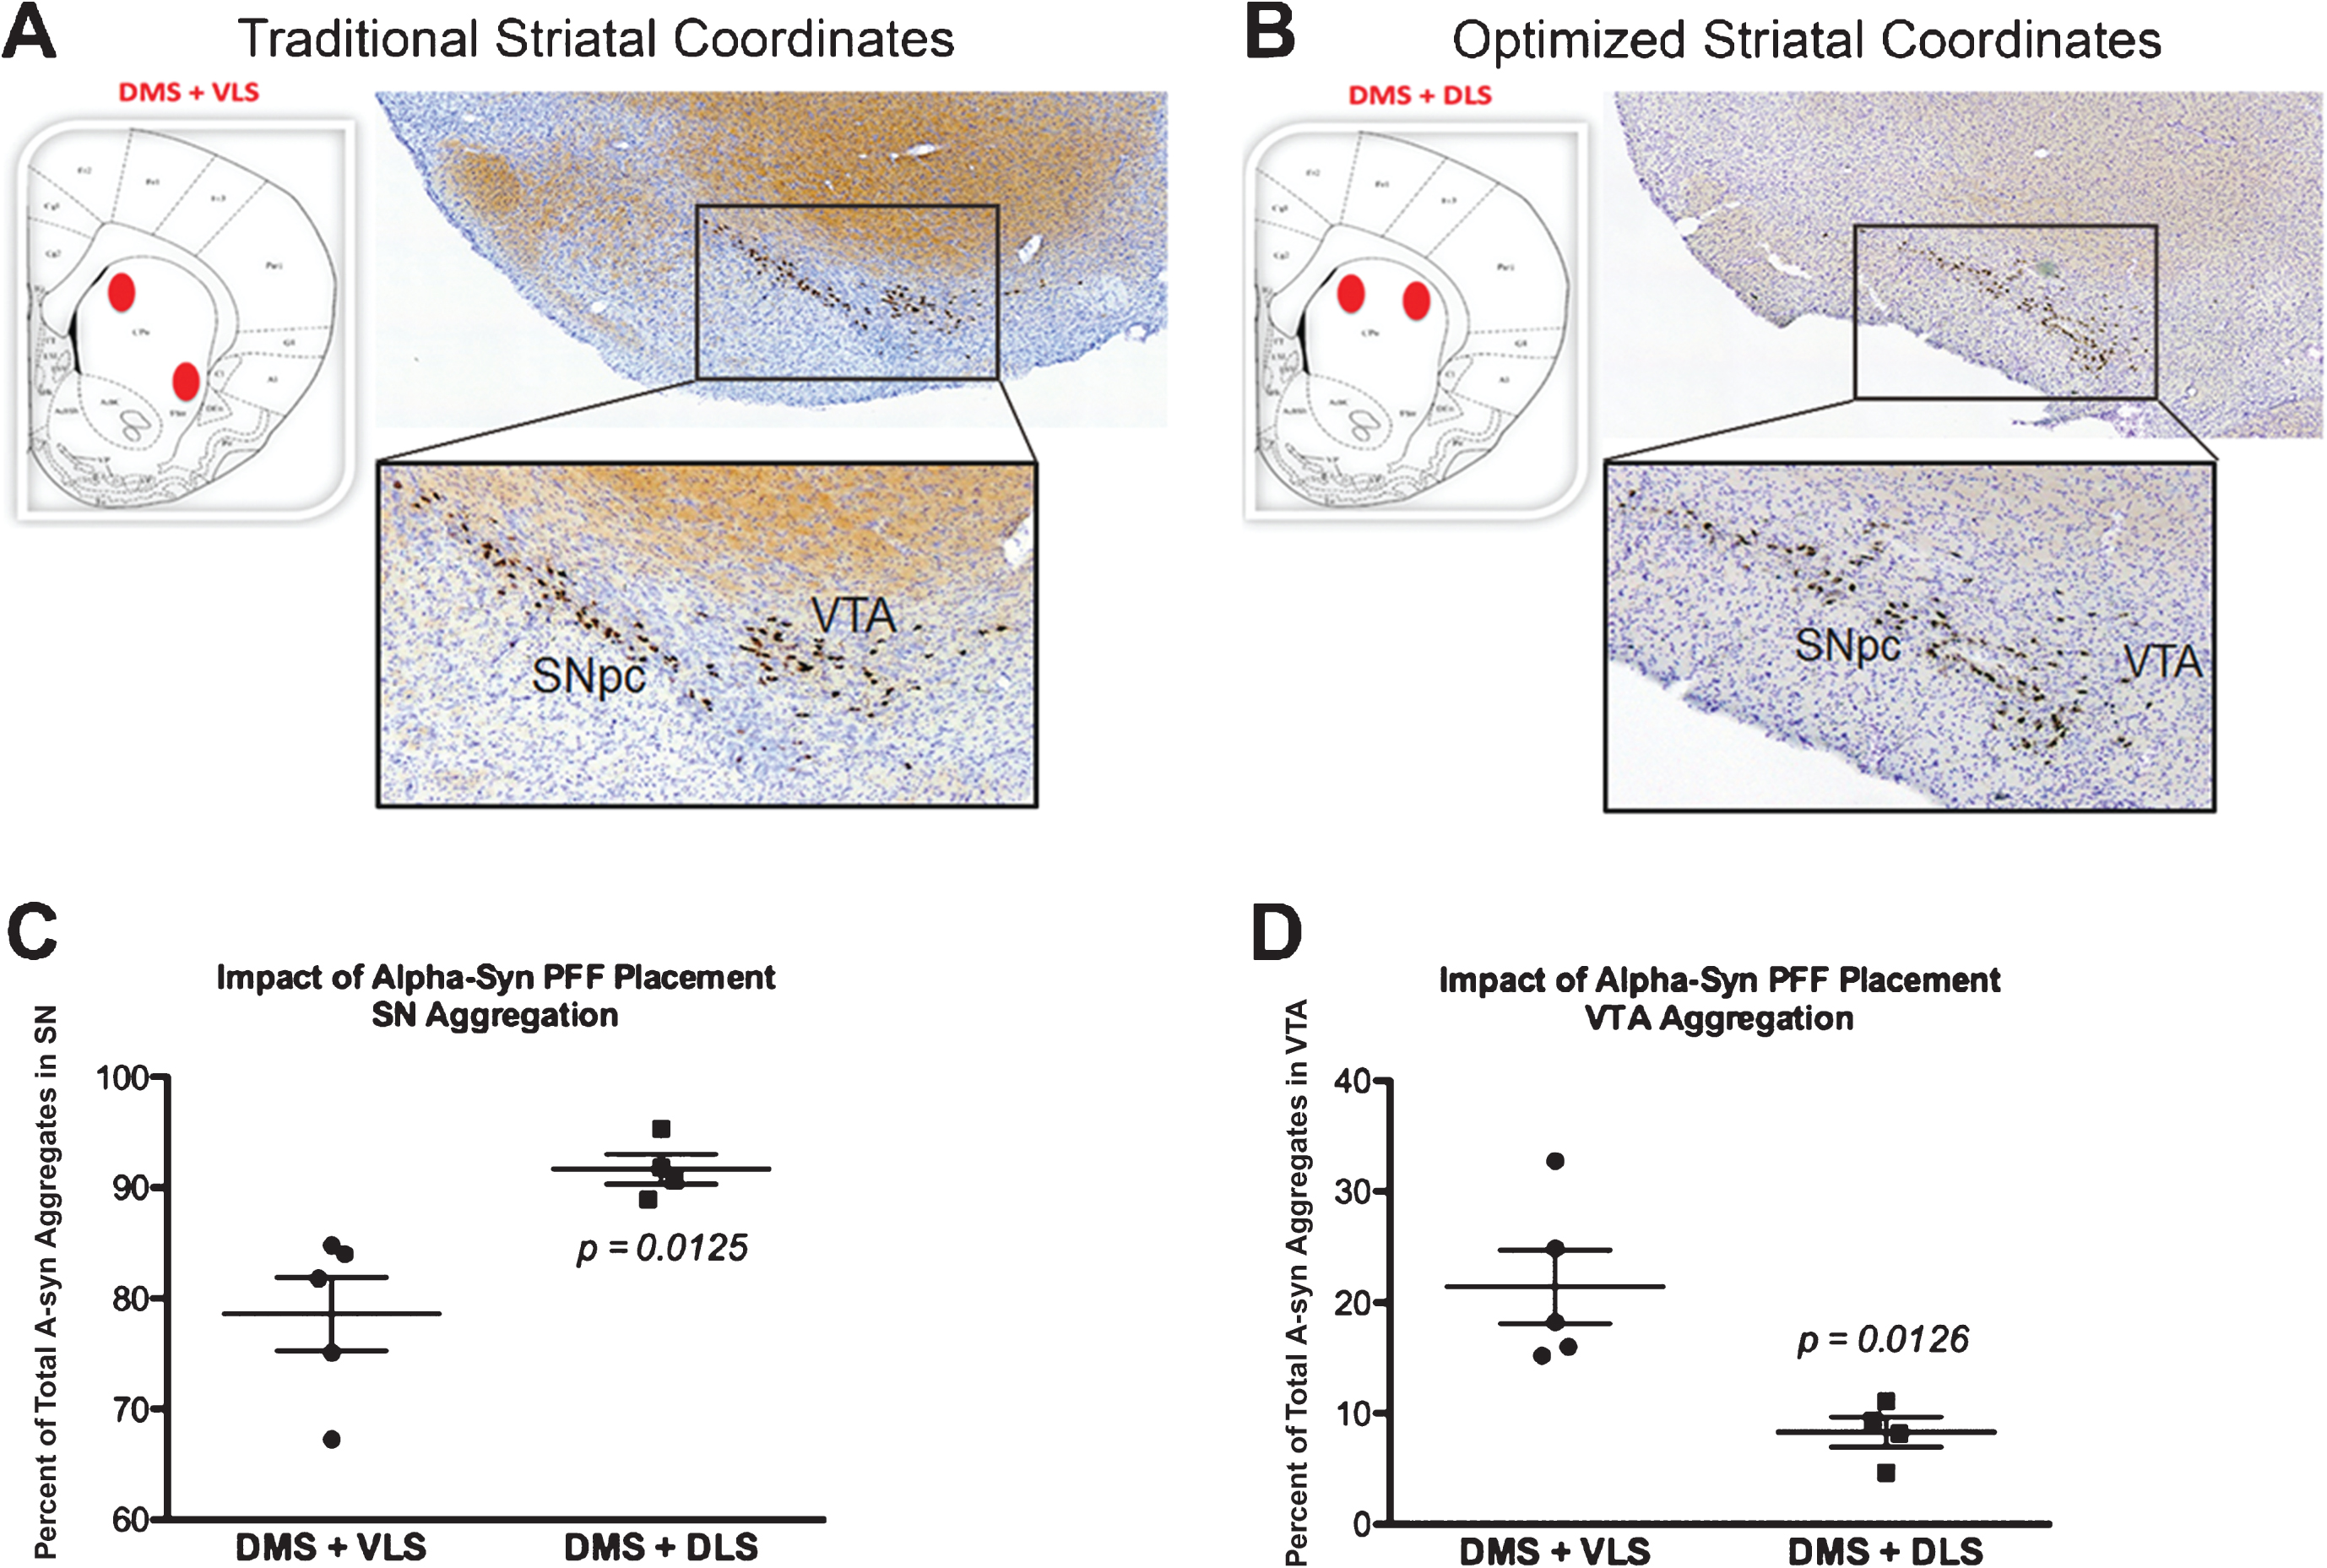 Optimized striatal injection coordinates for use in the rat alpha-synuclein pre-formed fibril (aSyn PFF) model. A–B) Comparison of pS129 aSyn expression in the ipsilateral midbrain after two site striatal injections using (A) original, traditionally-used coordinates [34] or (B) optimized coordinates guided by recent findings revealing distinct SNpc-striatal innervation patterns [54]. Neuroanatomical atlas images from Paxinos and Watson [58] depict the general coordinates used for injection. Representative low and high magnification images are shown for ipsilateral midbrain stained with cresyl violet (purple) and antibodies directed against pS129 aSyn (brown). A) Traditional injection coordinates involve injection into the dorsomedial striatum (DMS) and ventrolateral striatum (VLS). Injection into these coordinates induces robust pS129 aSyn expression in the SNpc as well as the ventral tegmental area (VTA). B) Optimized injection coordinates involve injection into the DMS as well as the dorsolateral striatum (DLS). Injection into these coordinates induces robust pS129 aSyn expression that is localized primarily to the SNpc and absent from the VTA. C–D) Quantitation of the percentage of pS129 aggregates in the (C) SNpc or (D) VTA following injection using the original (DMS + VLS) or optimized (DMS + DLS) injection coordinates. Injection using the original coordinates results in ∼80% of aggregates in the SNpc and ∼20% of aggregates in the VTA whereas injection using the optimized coordinates results in ∼90% of aggregates in the SNpc and ∼10% of aggregates in the VTA. Mean values are shown with error bars denoting standard error of the mean. aSyn, alpha-synuclein; PFF, pre-formed fibril; DMS, dorsomedial striatum; VLS, ventrolateral striatum; DLS, dorsolateral striatum; SNpc, substantia nigra pars compacta; VTA, ventral tegemental area; pS129 aSyn, alpha-synuclein phosphorylated at S129.